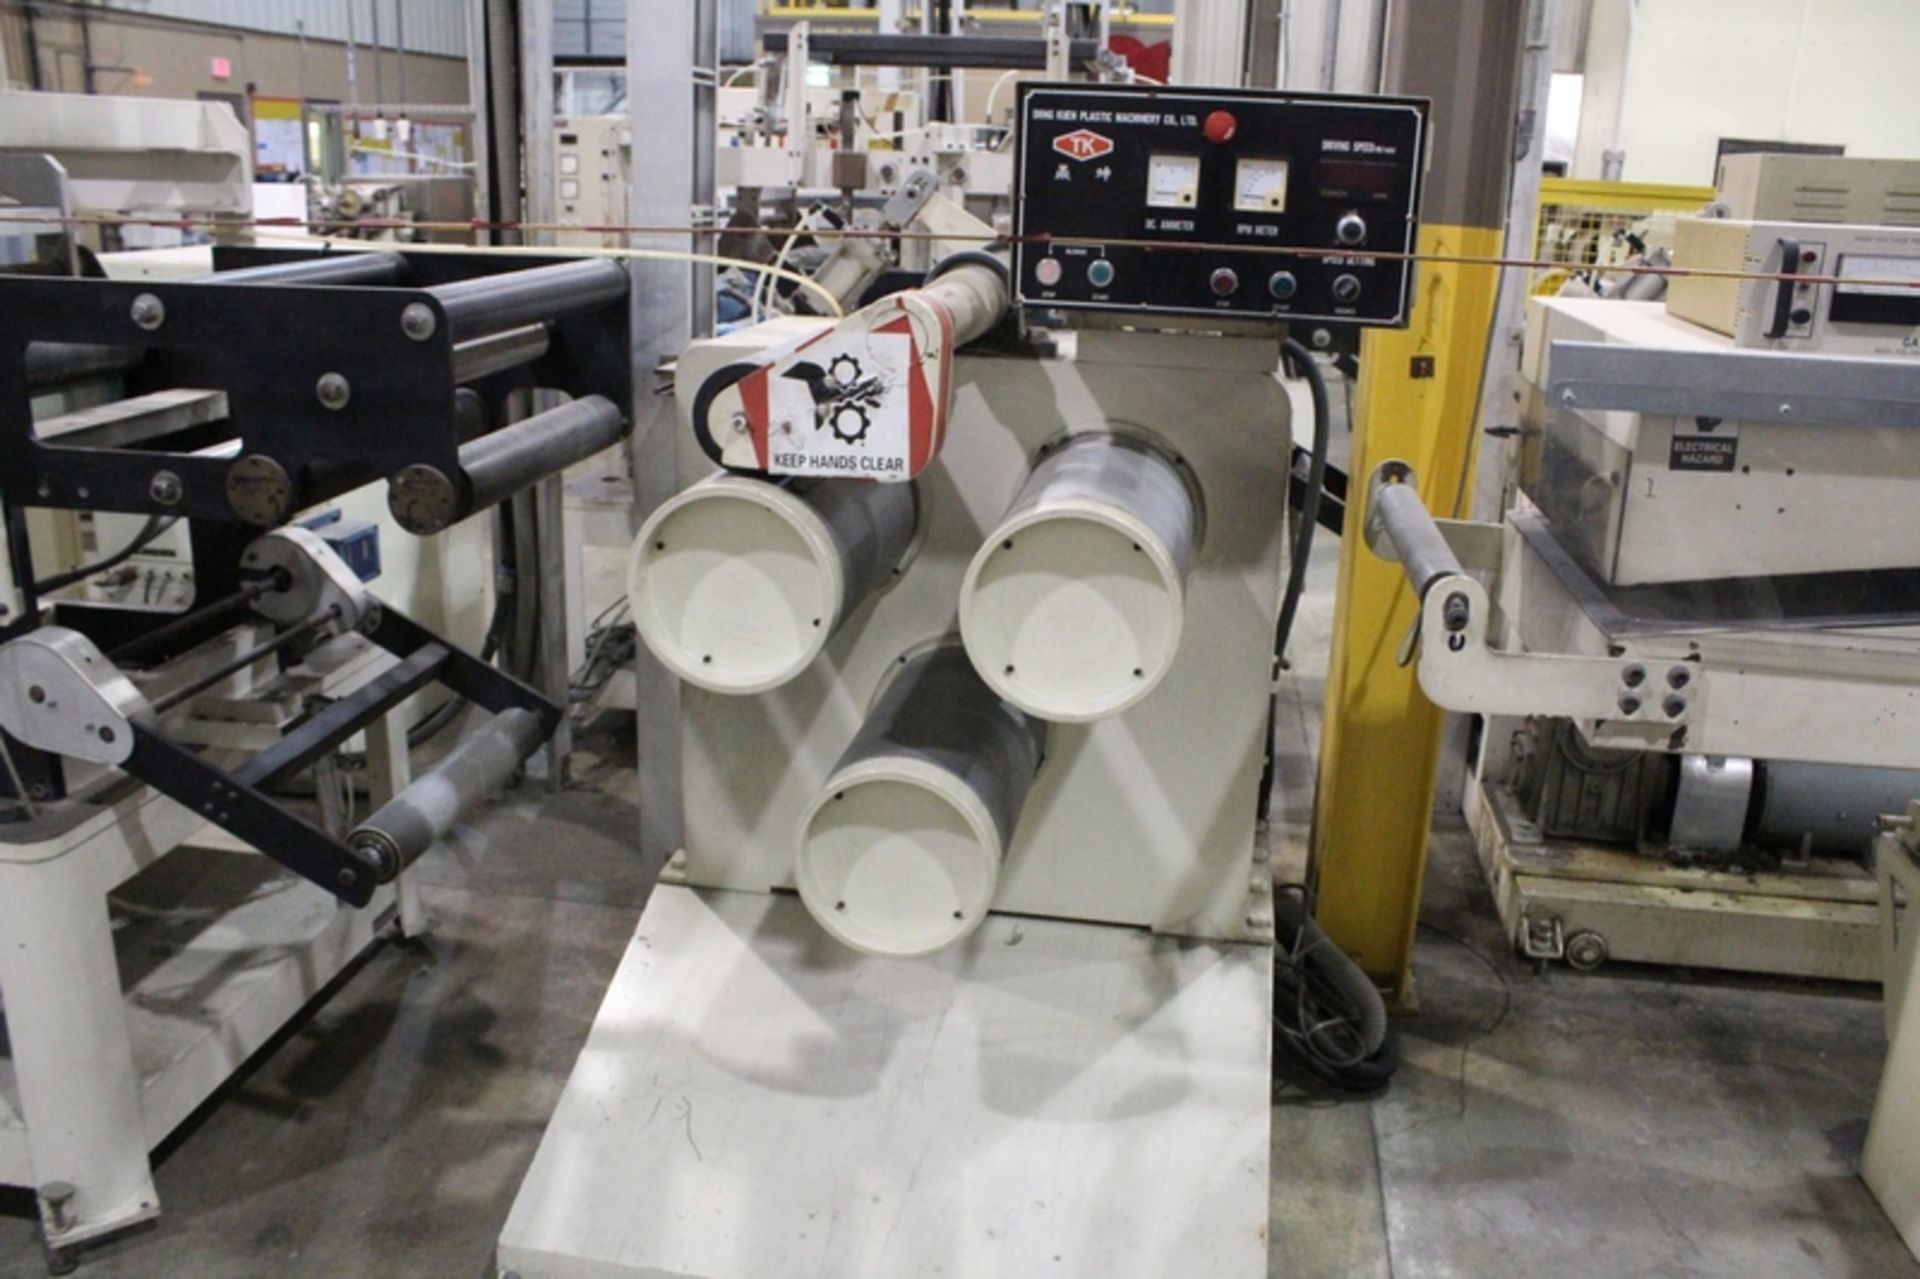 2 - Diing Kuen Model TK-FY30 3 Roll S Roll Stands, s/n 970102 (New 1997), Size 300MML, Digital Conch - Image 3 of 7